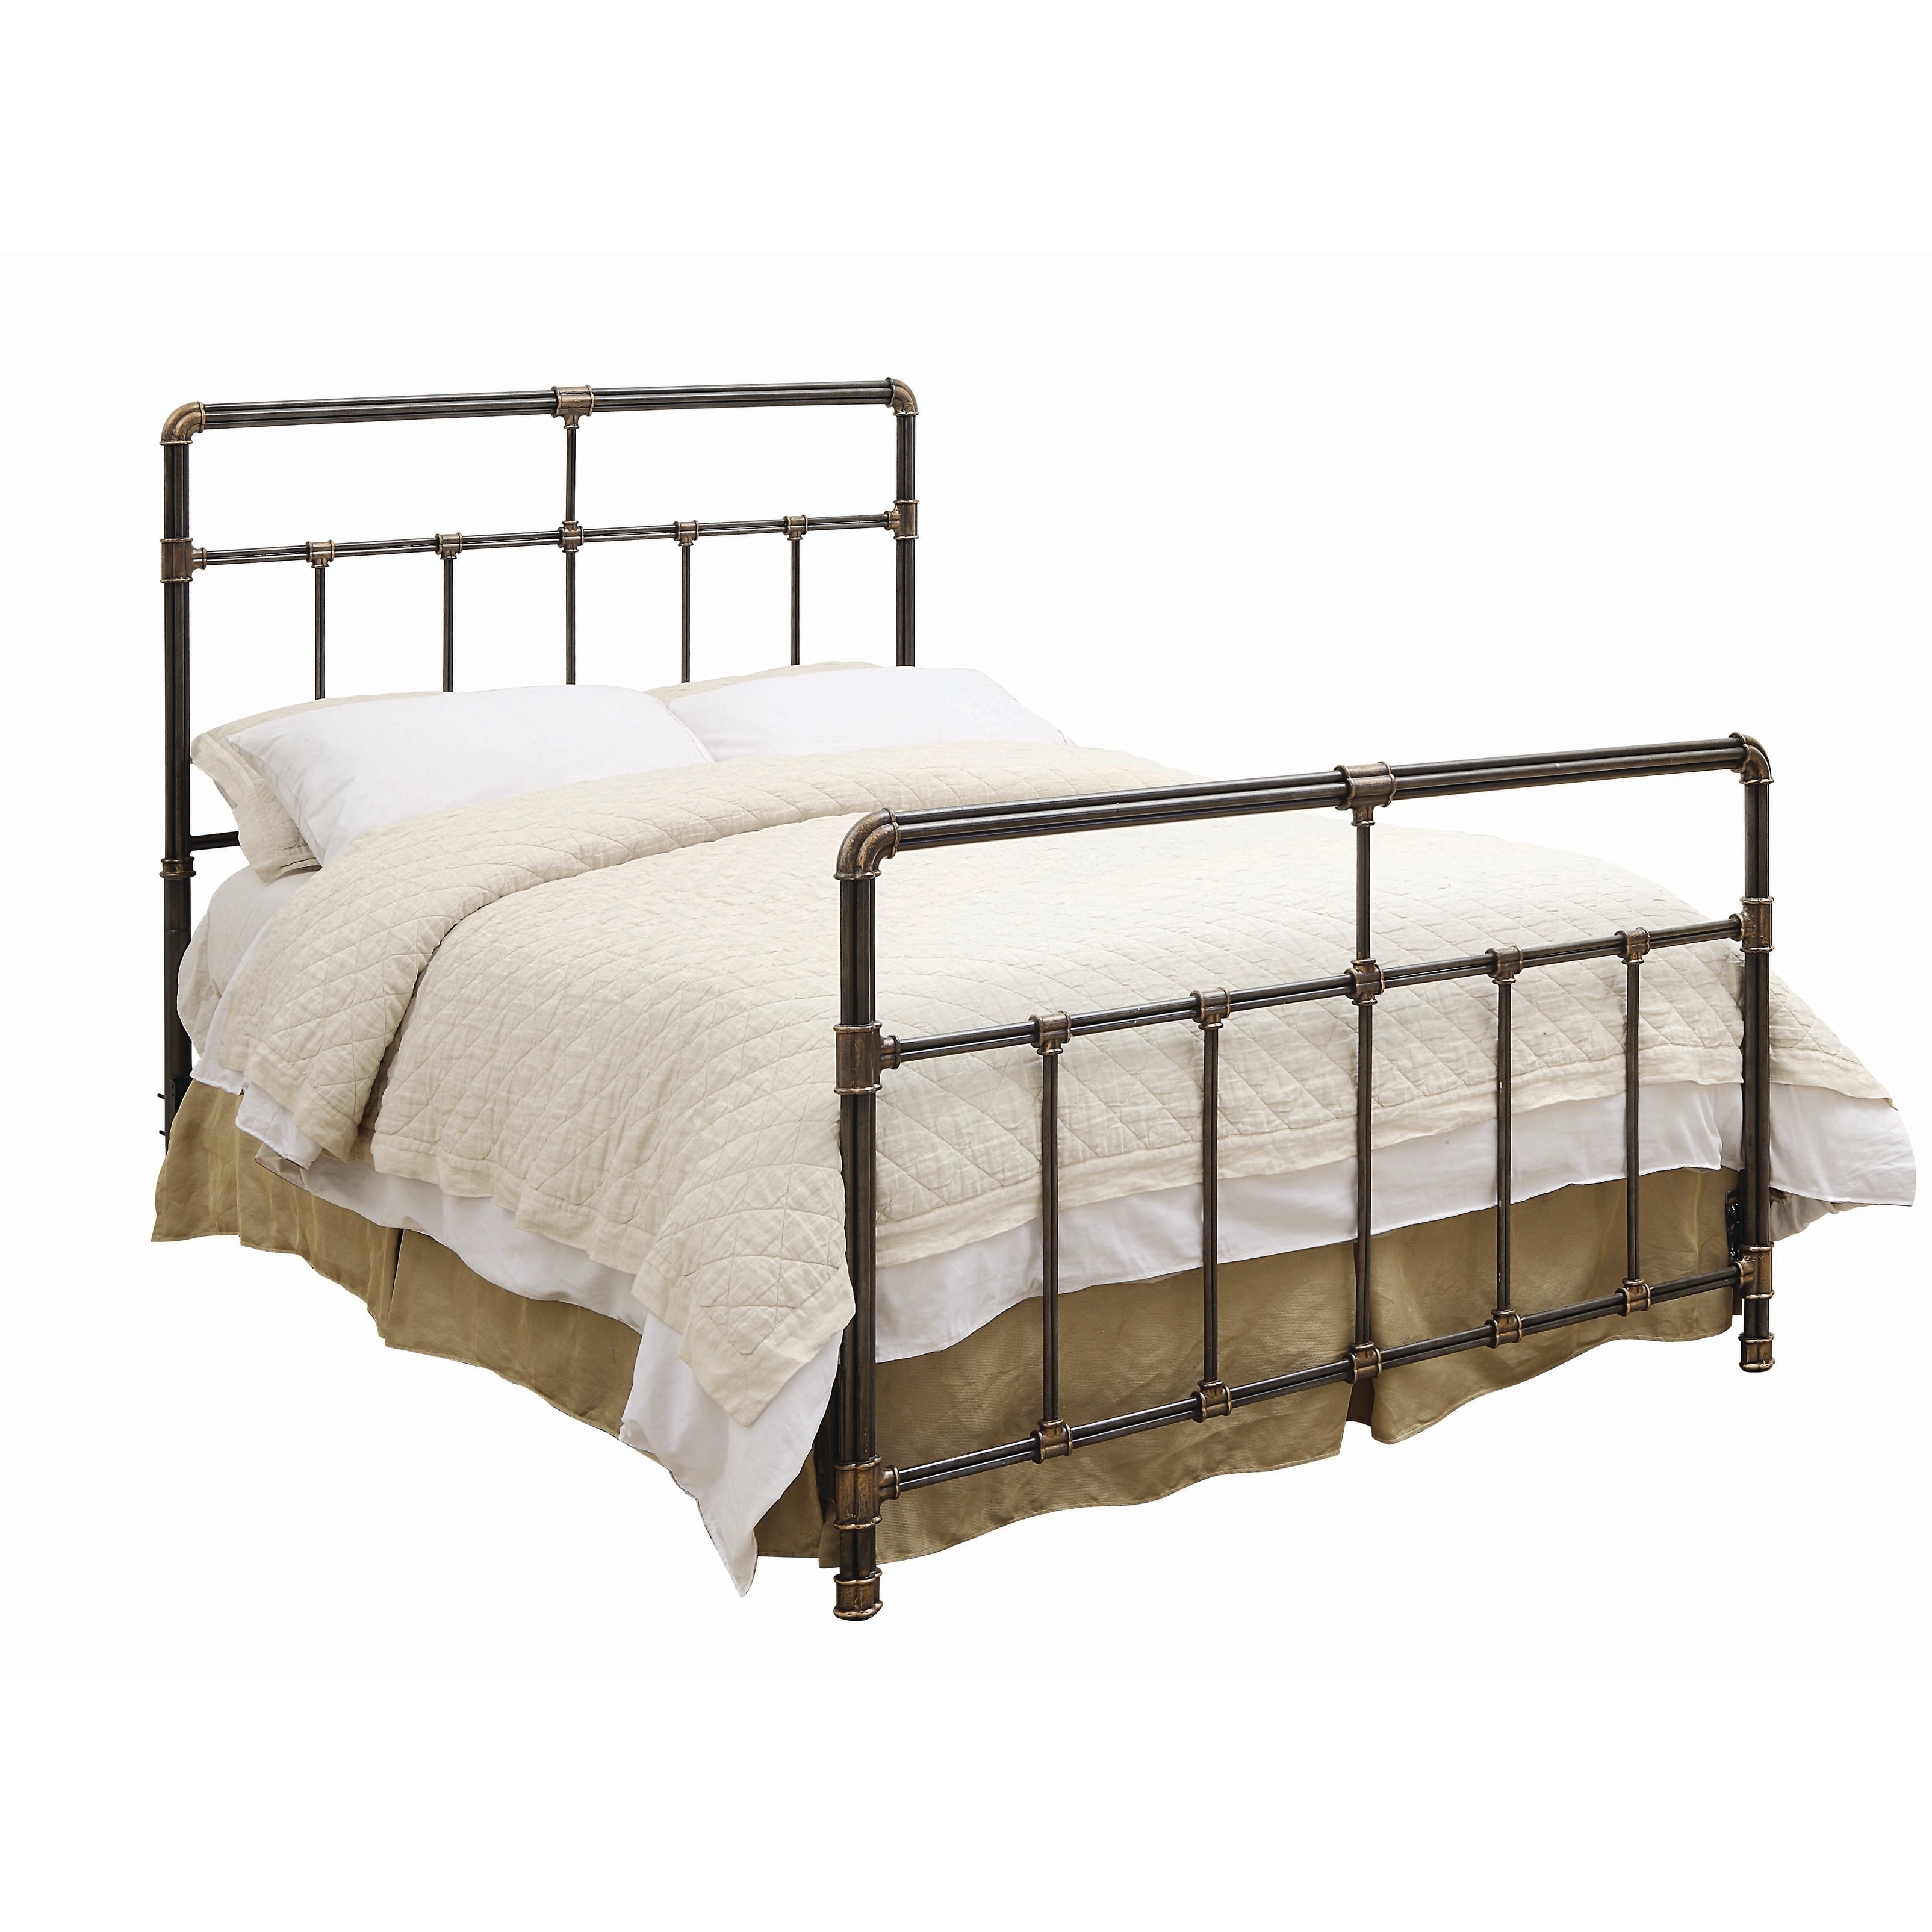 California King Beds For Less